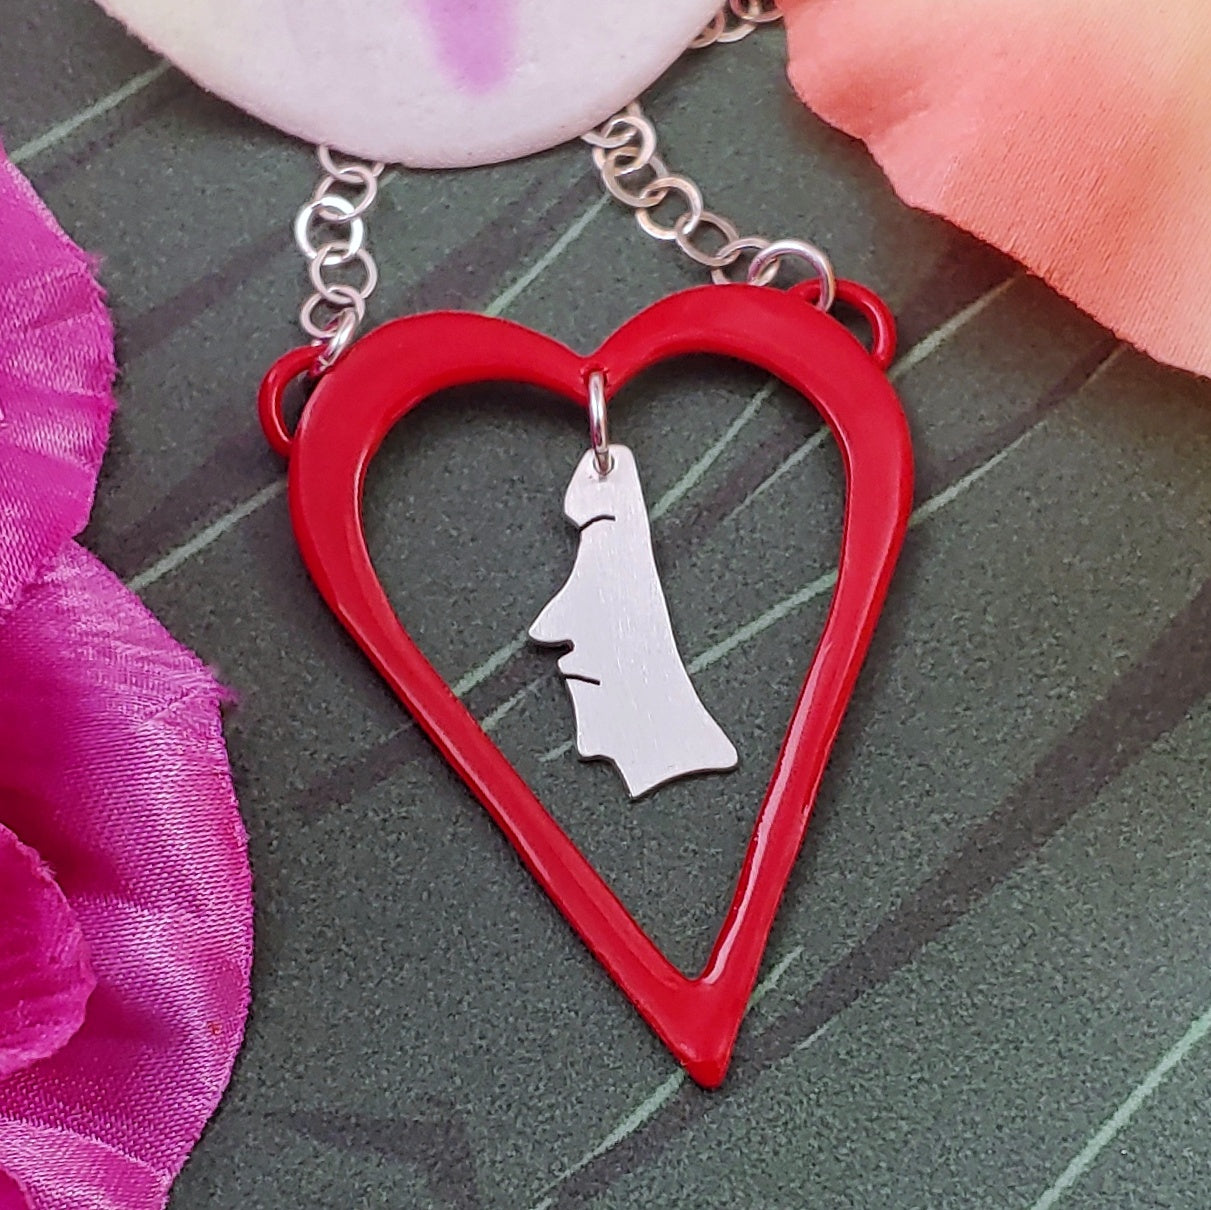 Powdercoated red heart shaped necklace with sterling silver moai dangling from the center